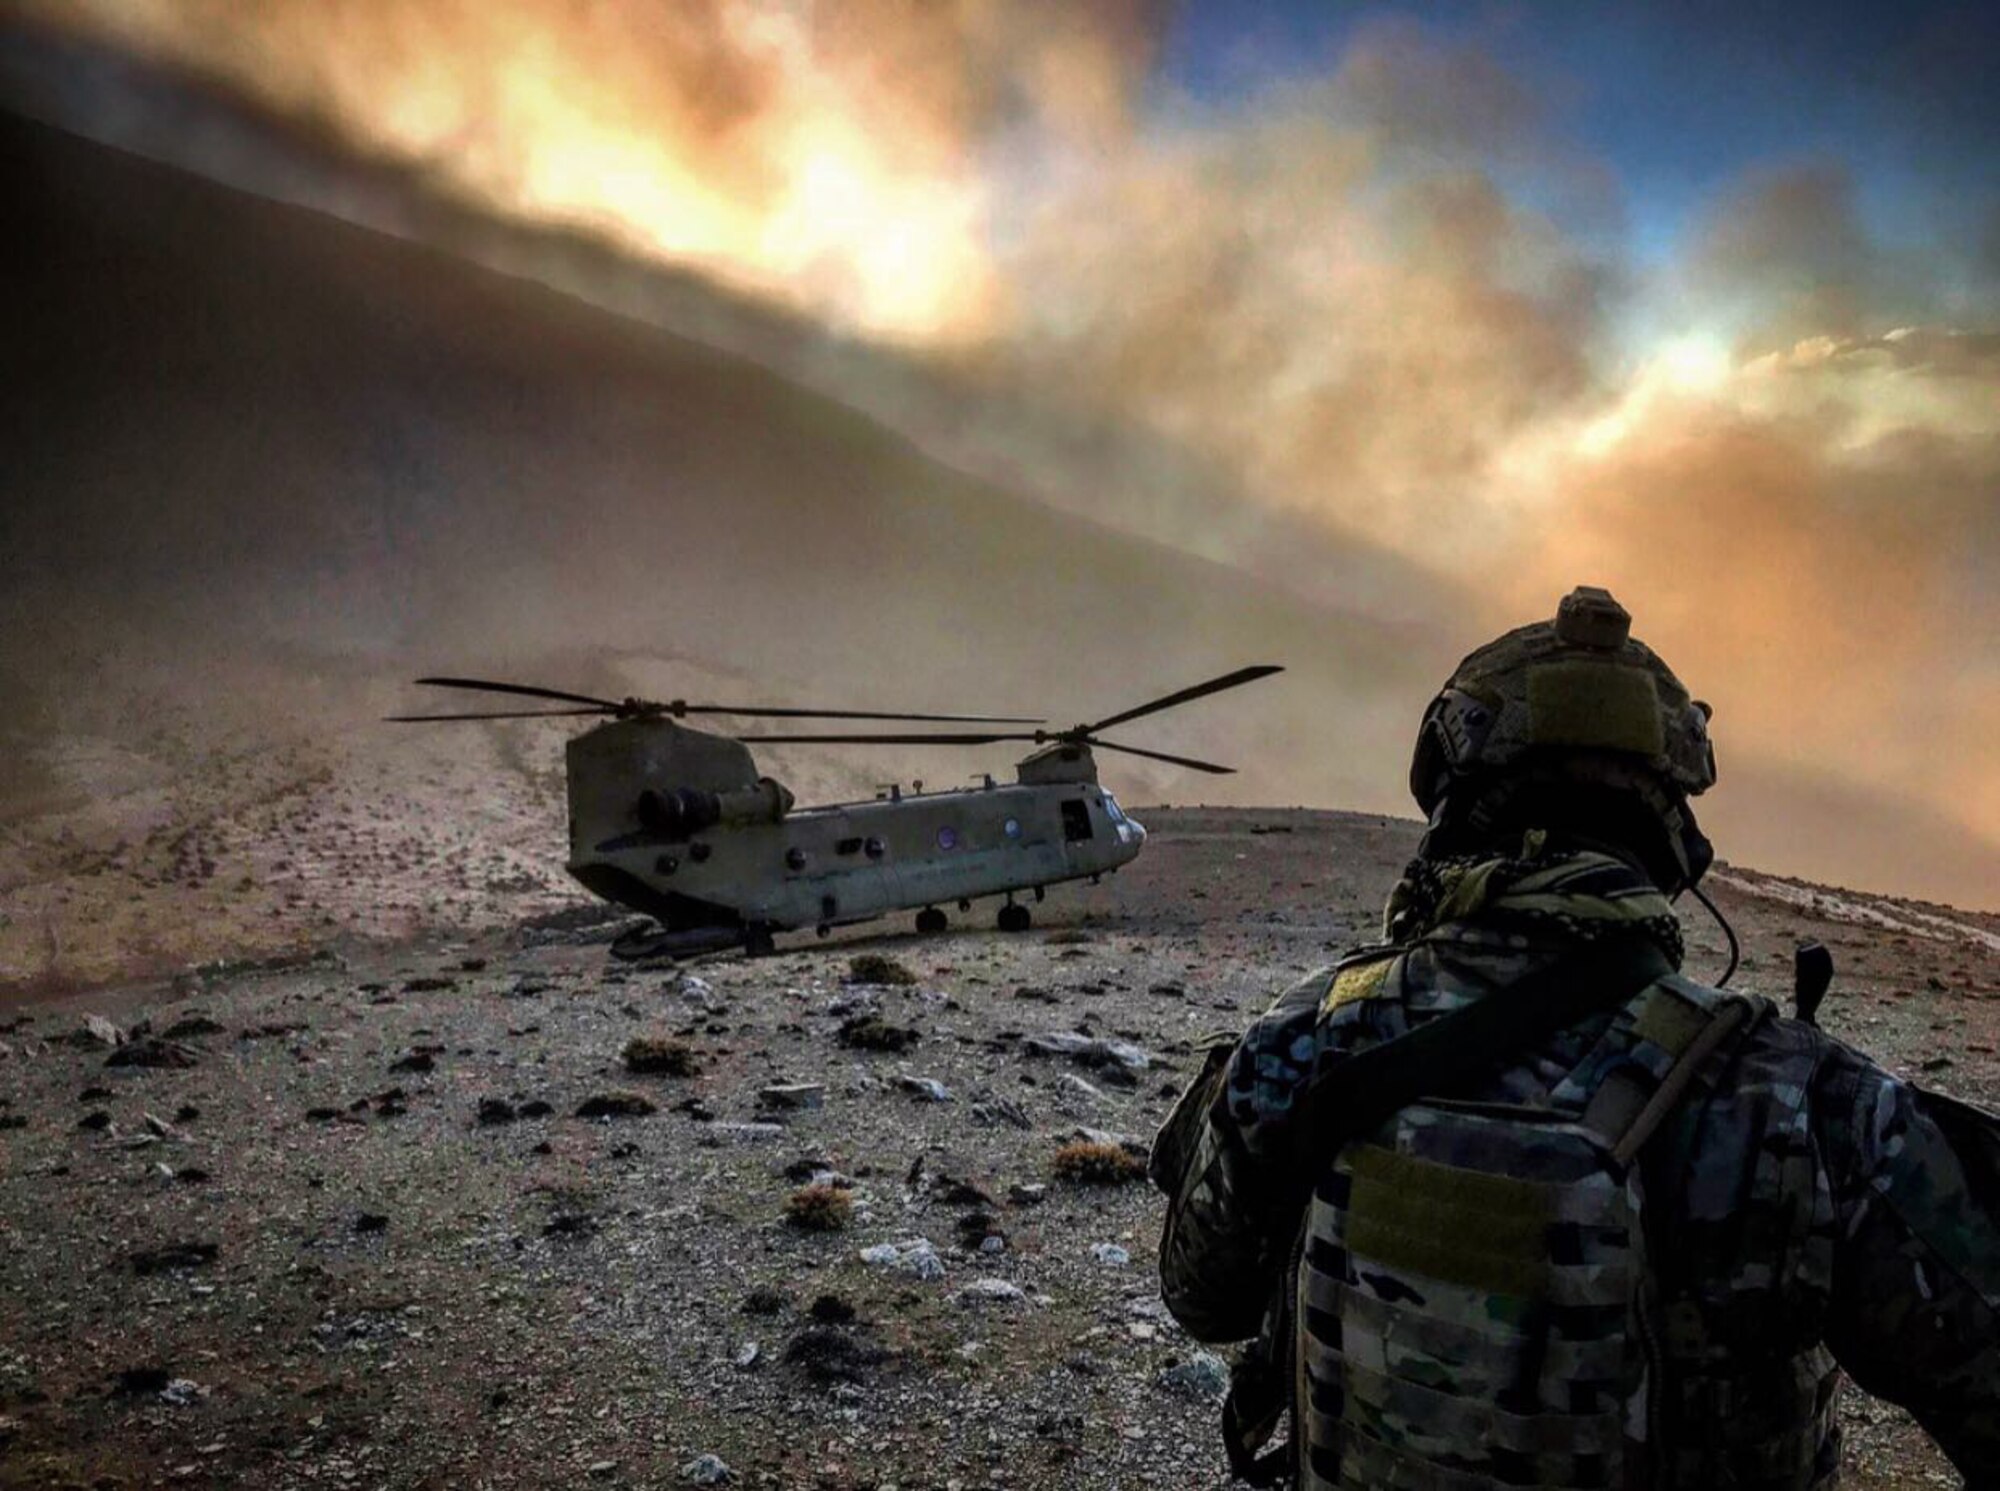 A member of the 83rd Expeditionary Rescue Squadron observes a U.S. Army CH-47 Chinook at an undisclosed location in Afghanistan. The 83rd ERQS is Air Force Central Command’s first dedicated joint personnel recovery team, utilizing Air Force Guardian Angel teams and Army CH-47 Chinook crews. (Courtesy photo)